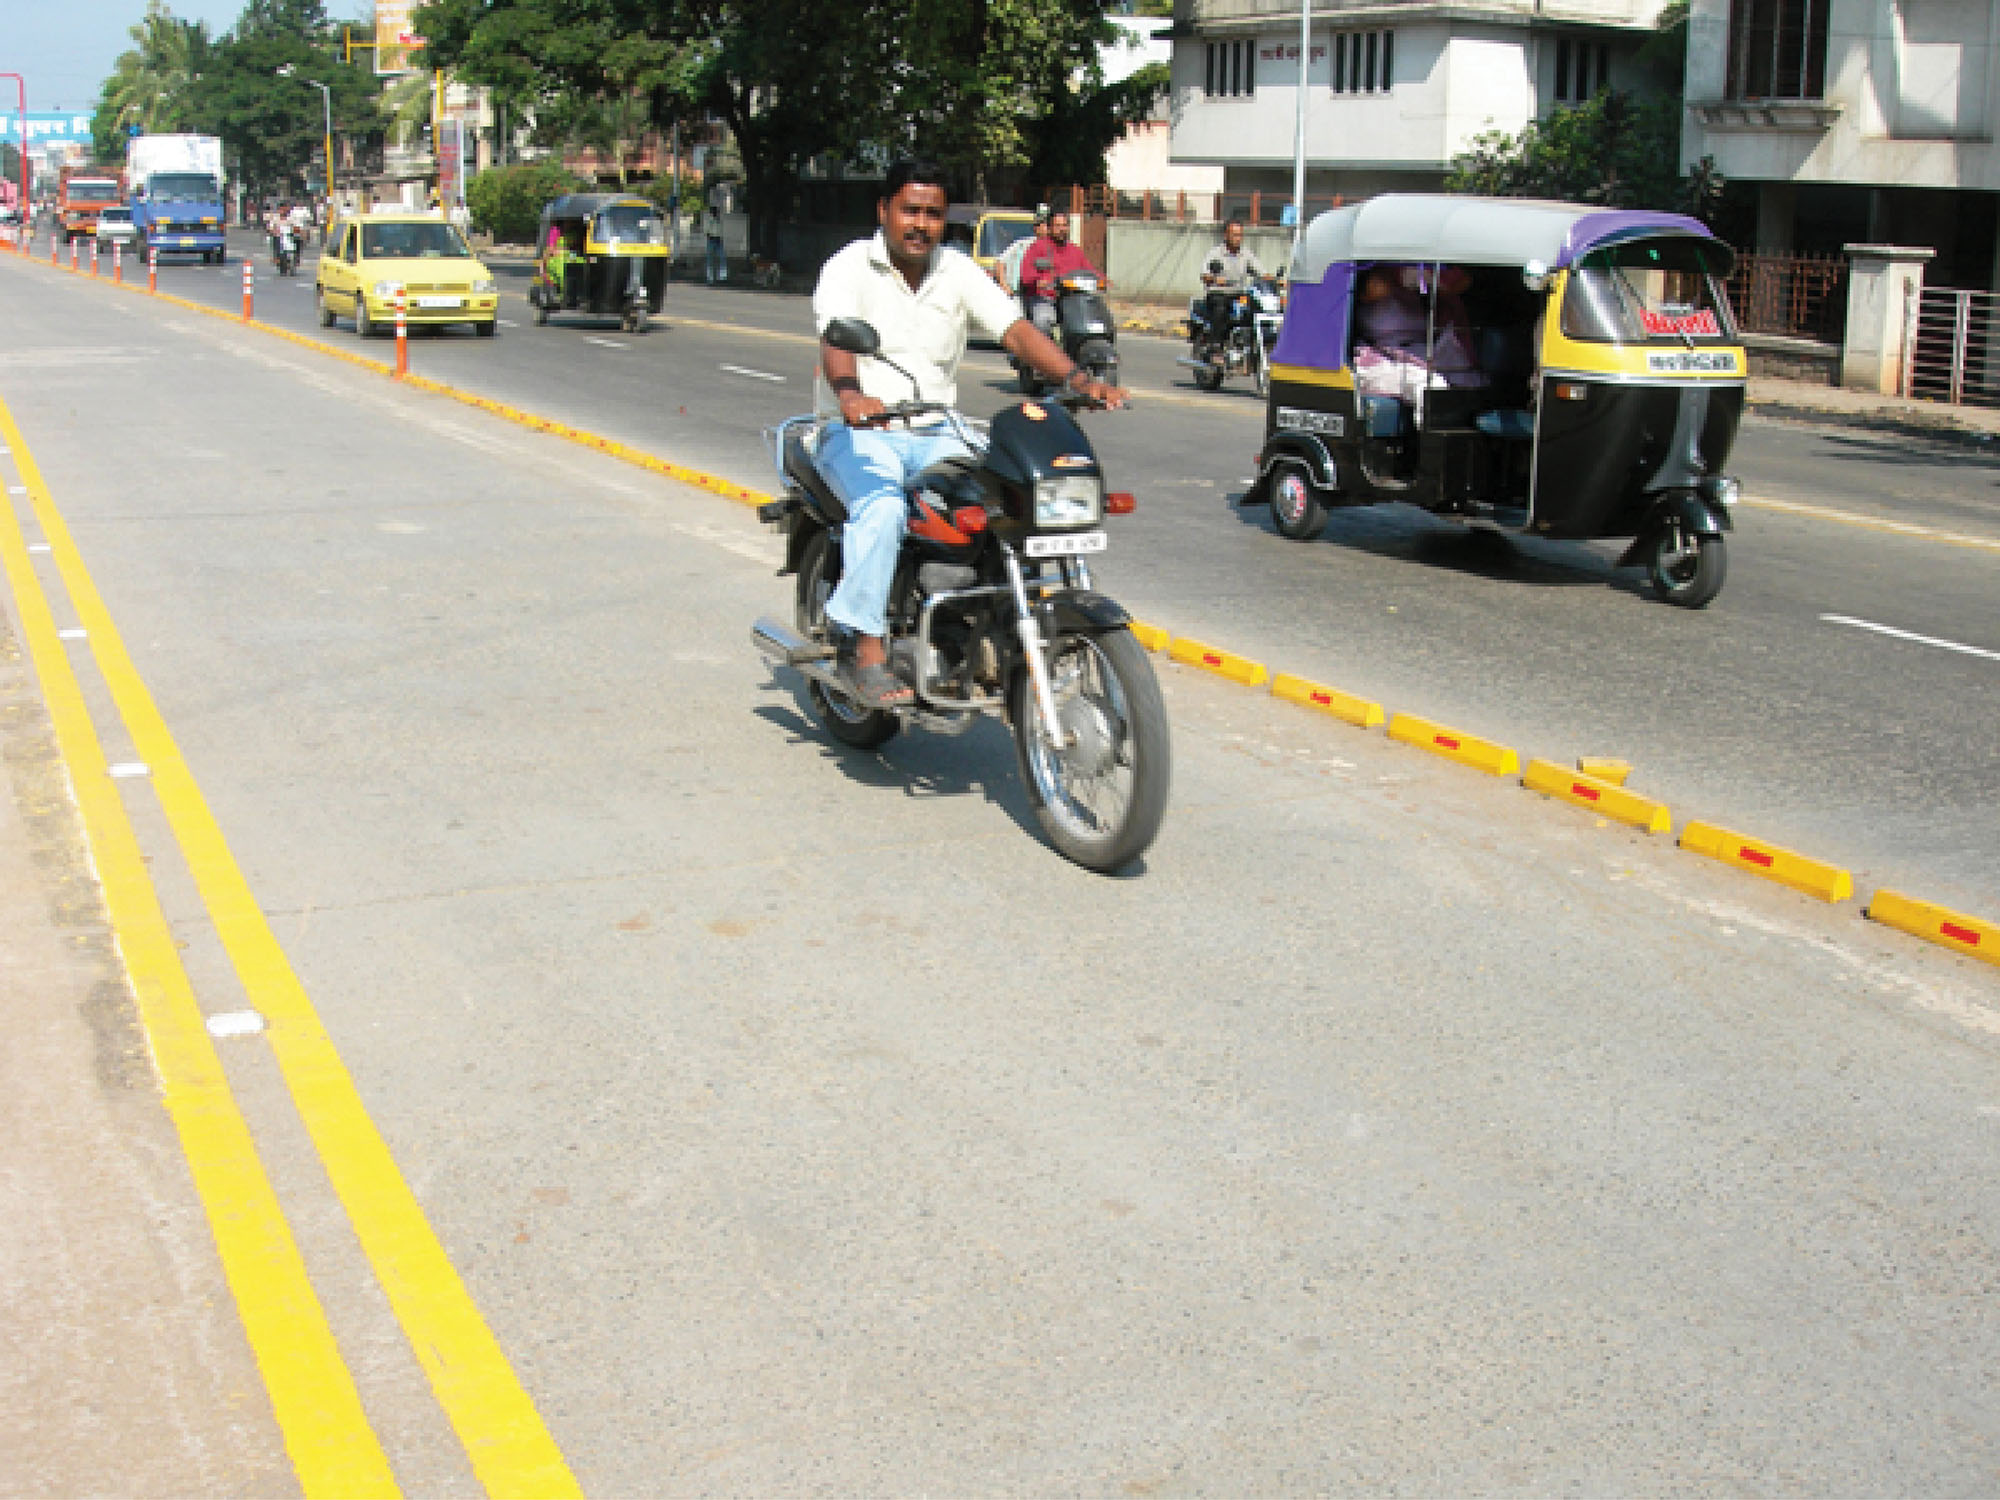 Fig. 23.14 Motorcycle illegally entering the busway in Pune, India.